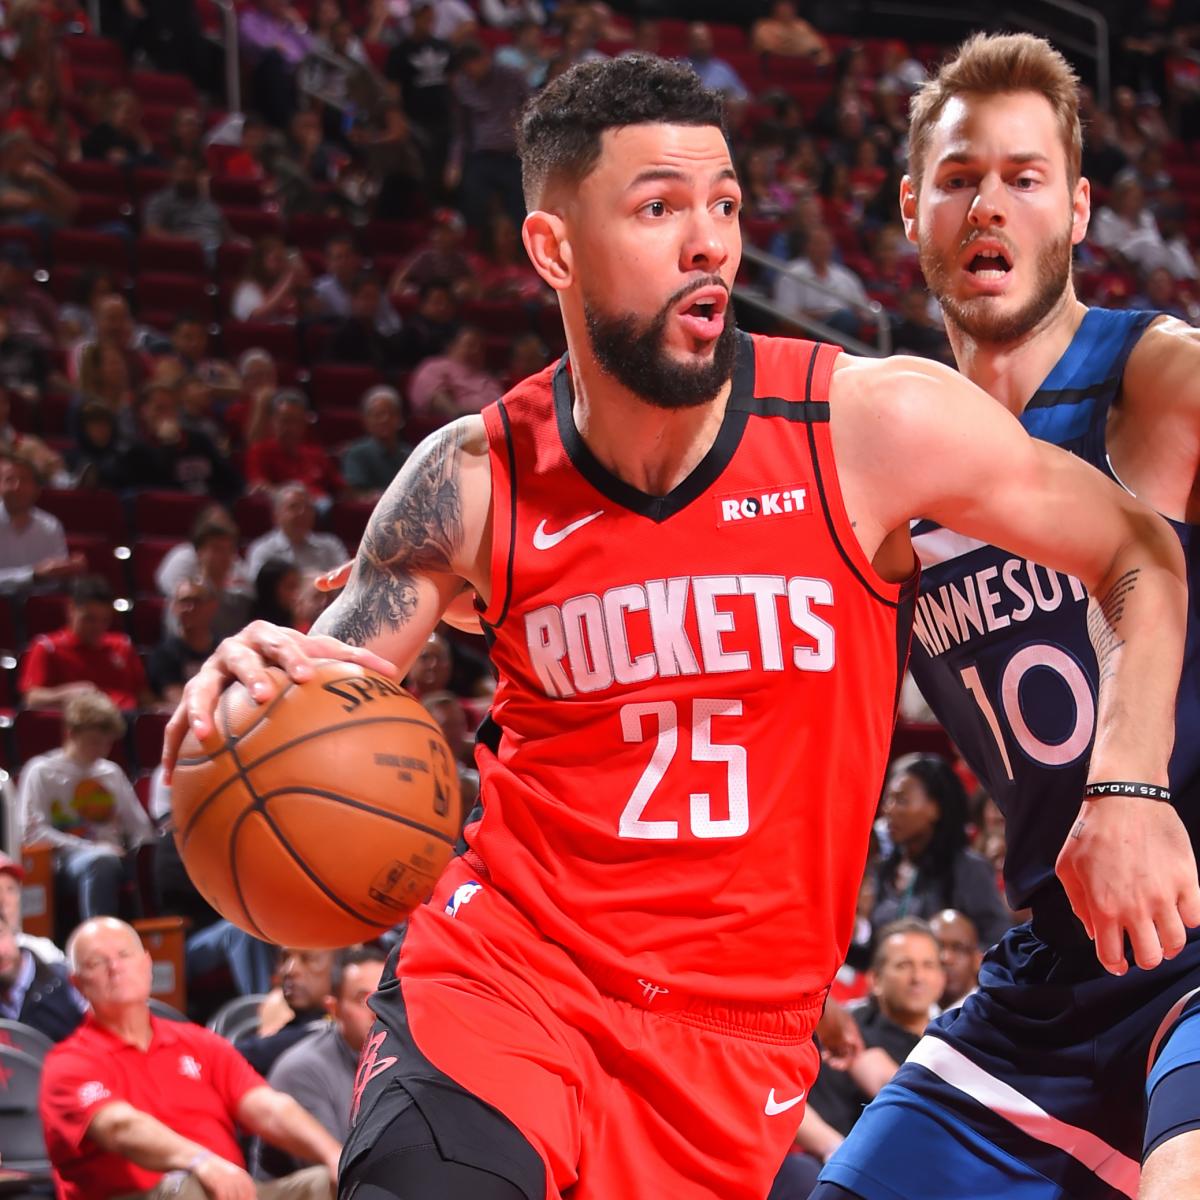 Rockets’ Austin Rivers: 2020 NBA Finals Will Be 1 of ‘Toughest’ Titles Ever Received